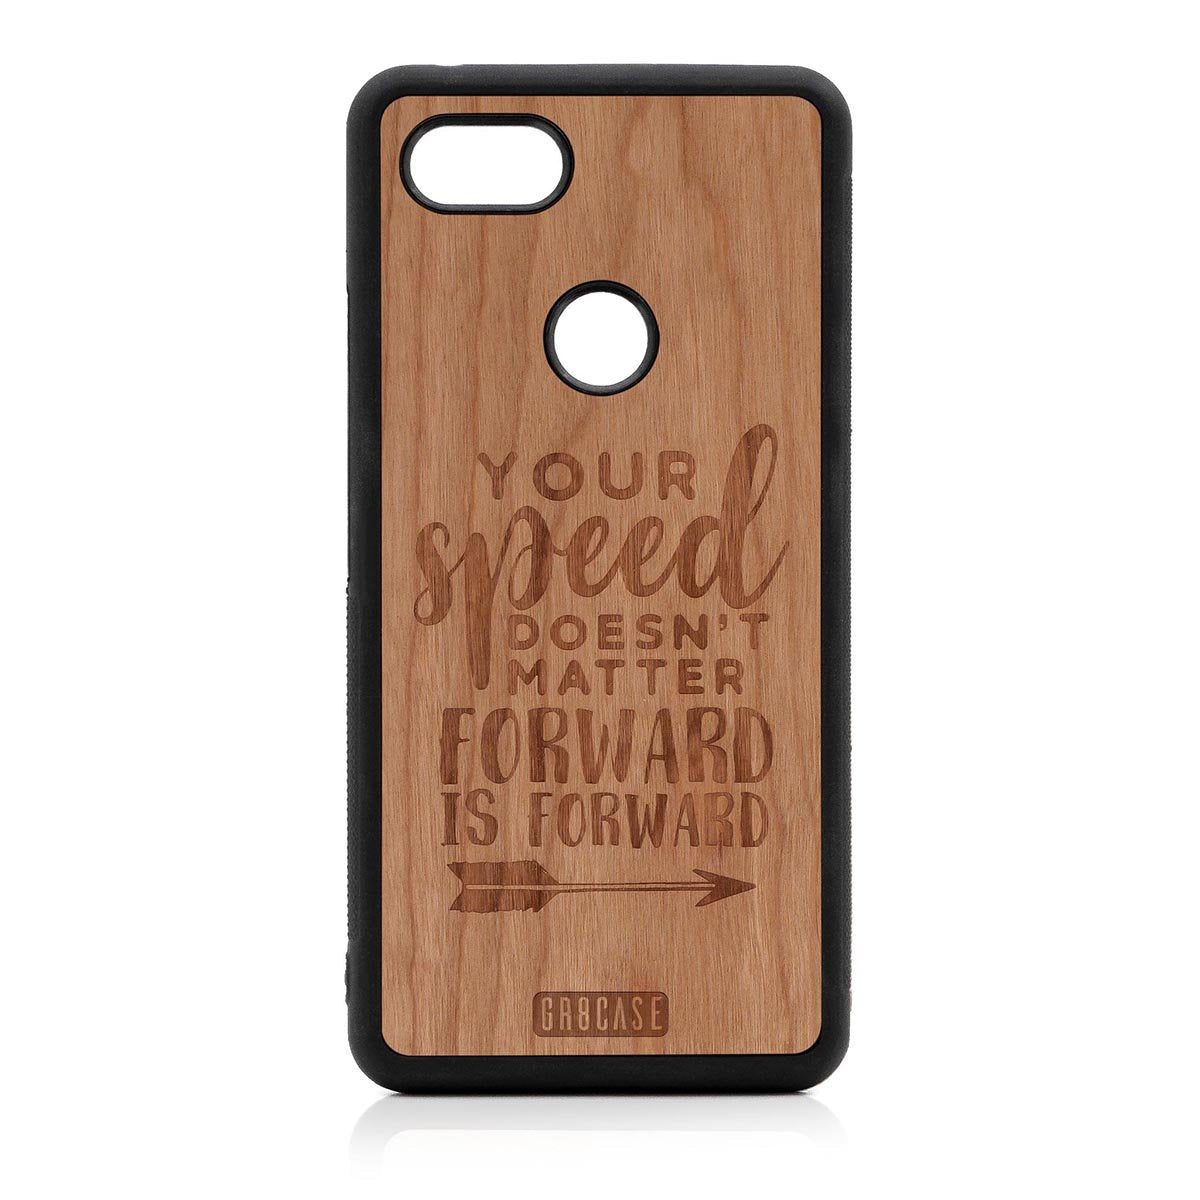 Your Speed Doesn't Matter Forward Is Forward Design Wood Case Google Pixel 3 XL